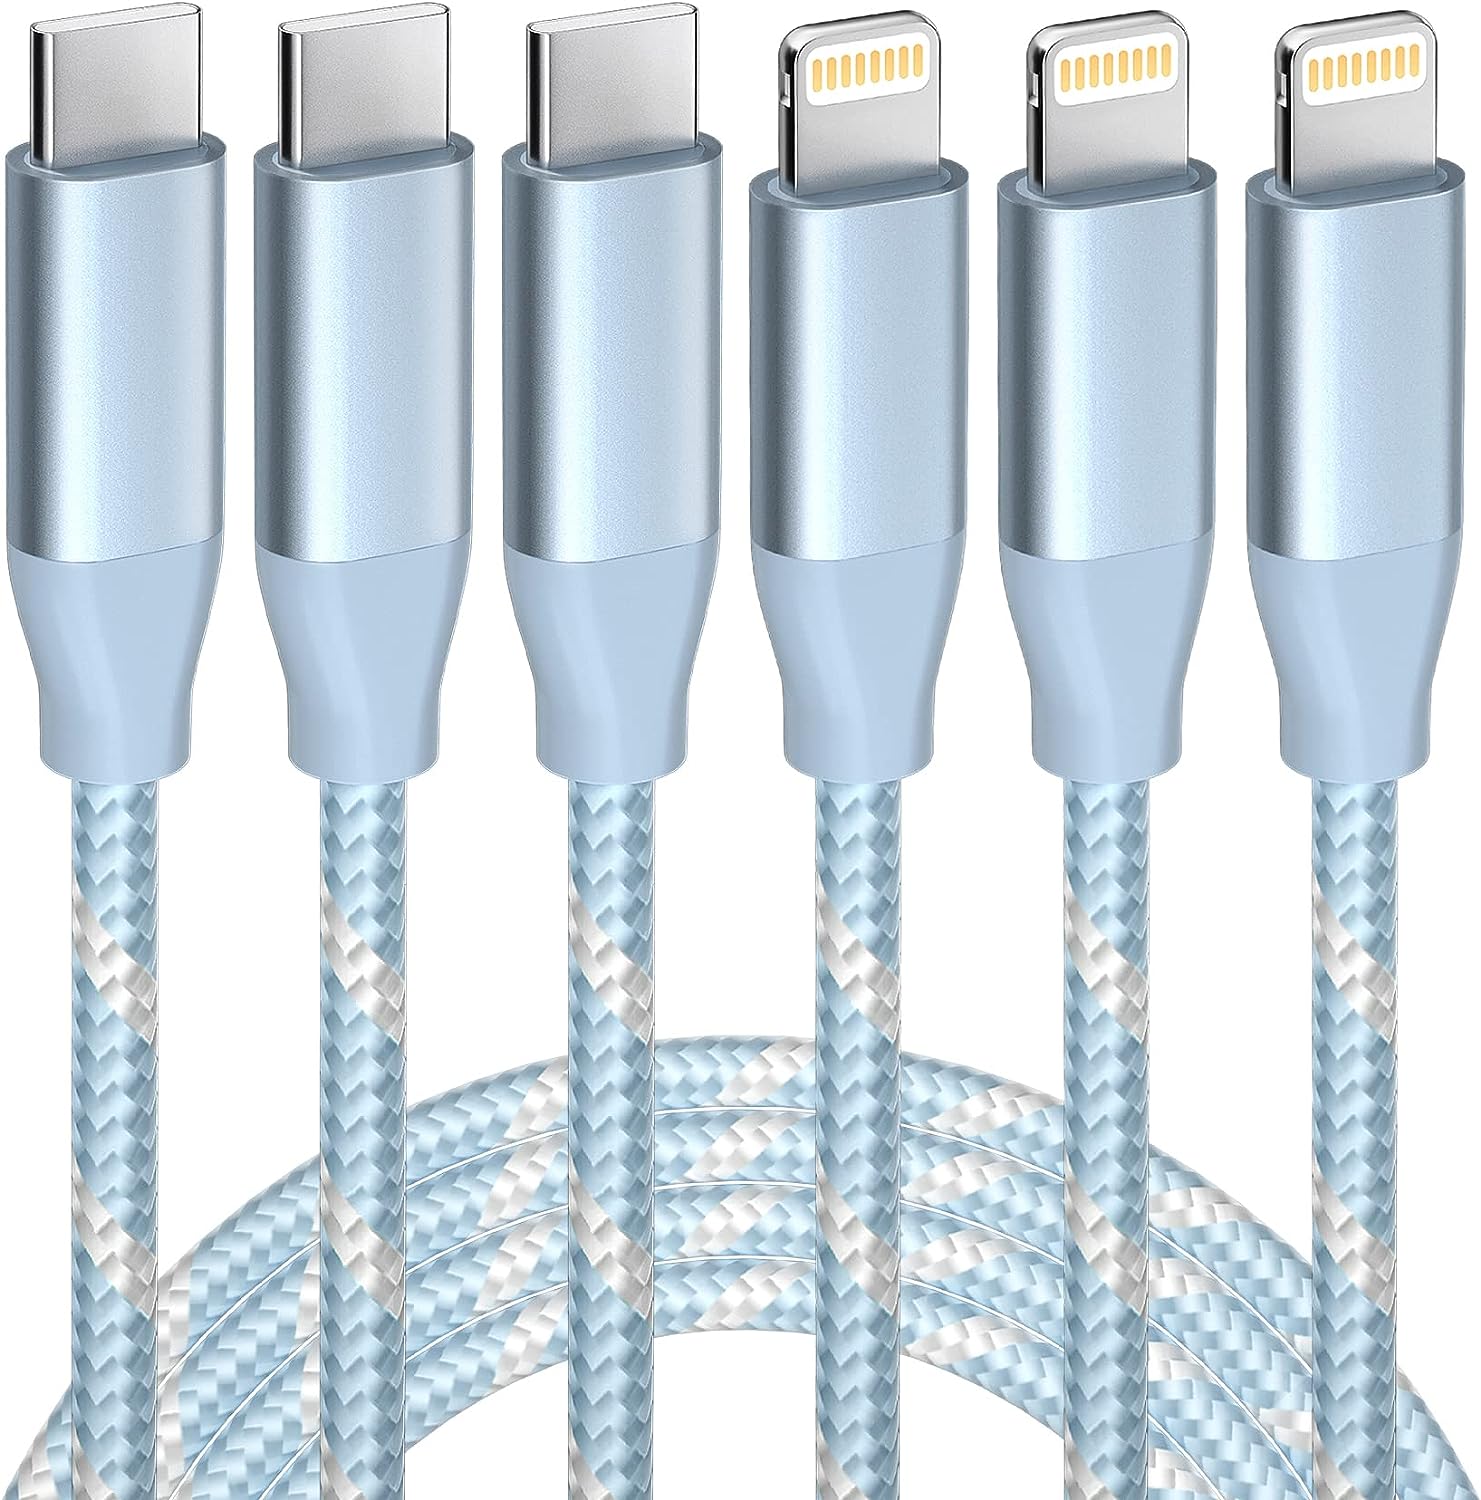 USB C to Lightning Cable 3 Pack 6FT Apple MFi [...]